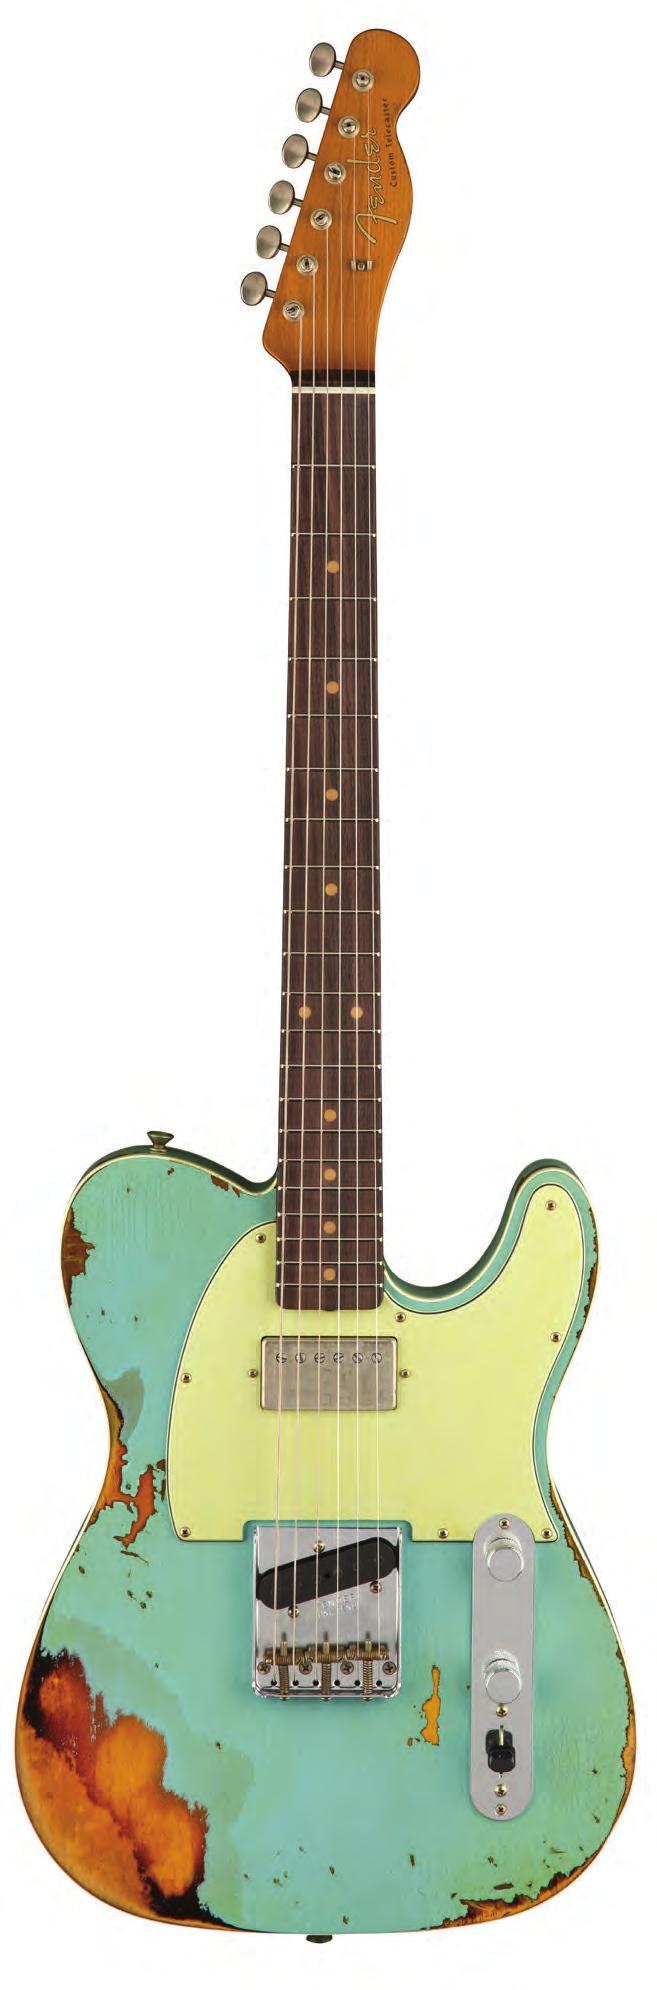 Limited Edition 923-5000-XXX LTD TOMATILLO STRATOCASTER - JOURNEYMAN RELIC Journeyman Relic Flash Coat Lacquer Finish; 2-Piece Select Alder Body; 1-Piece Tinted AA Flame Quartersawn Maple Neck with